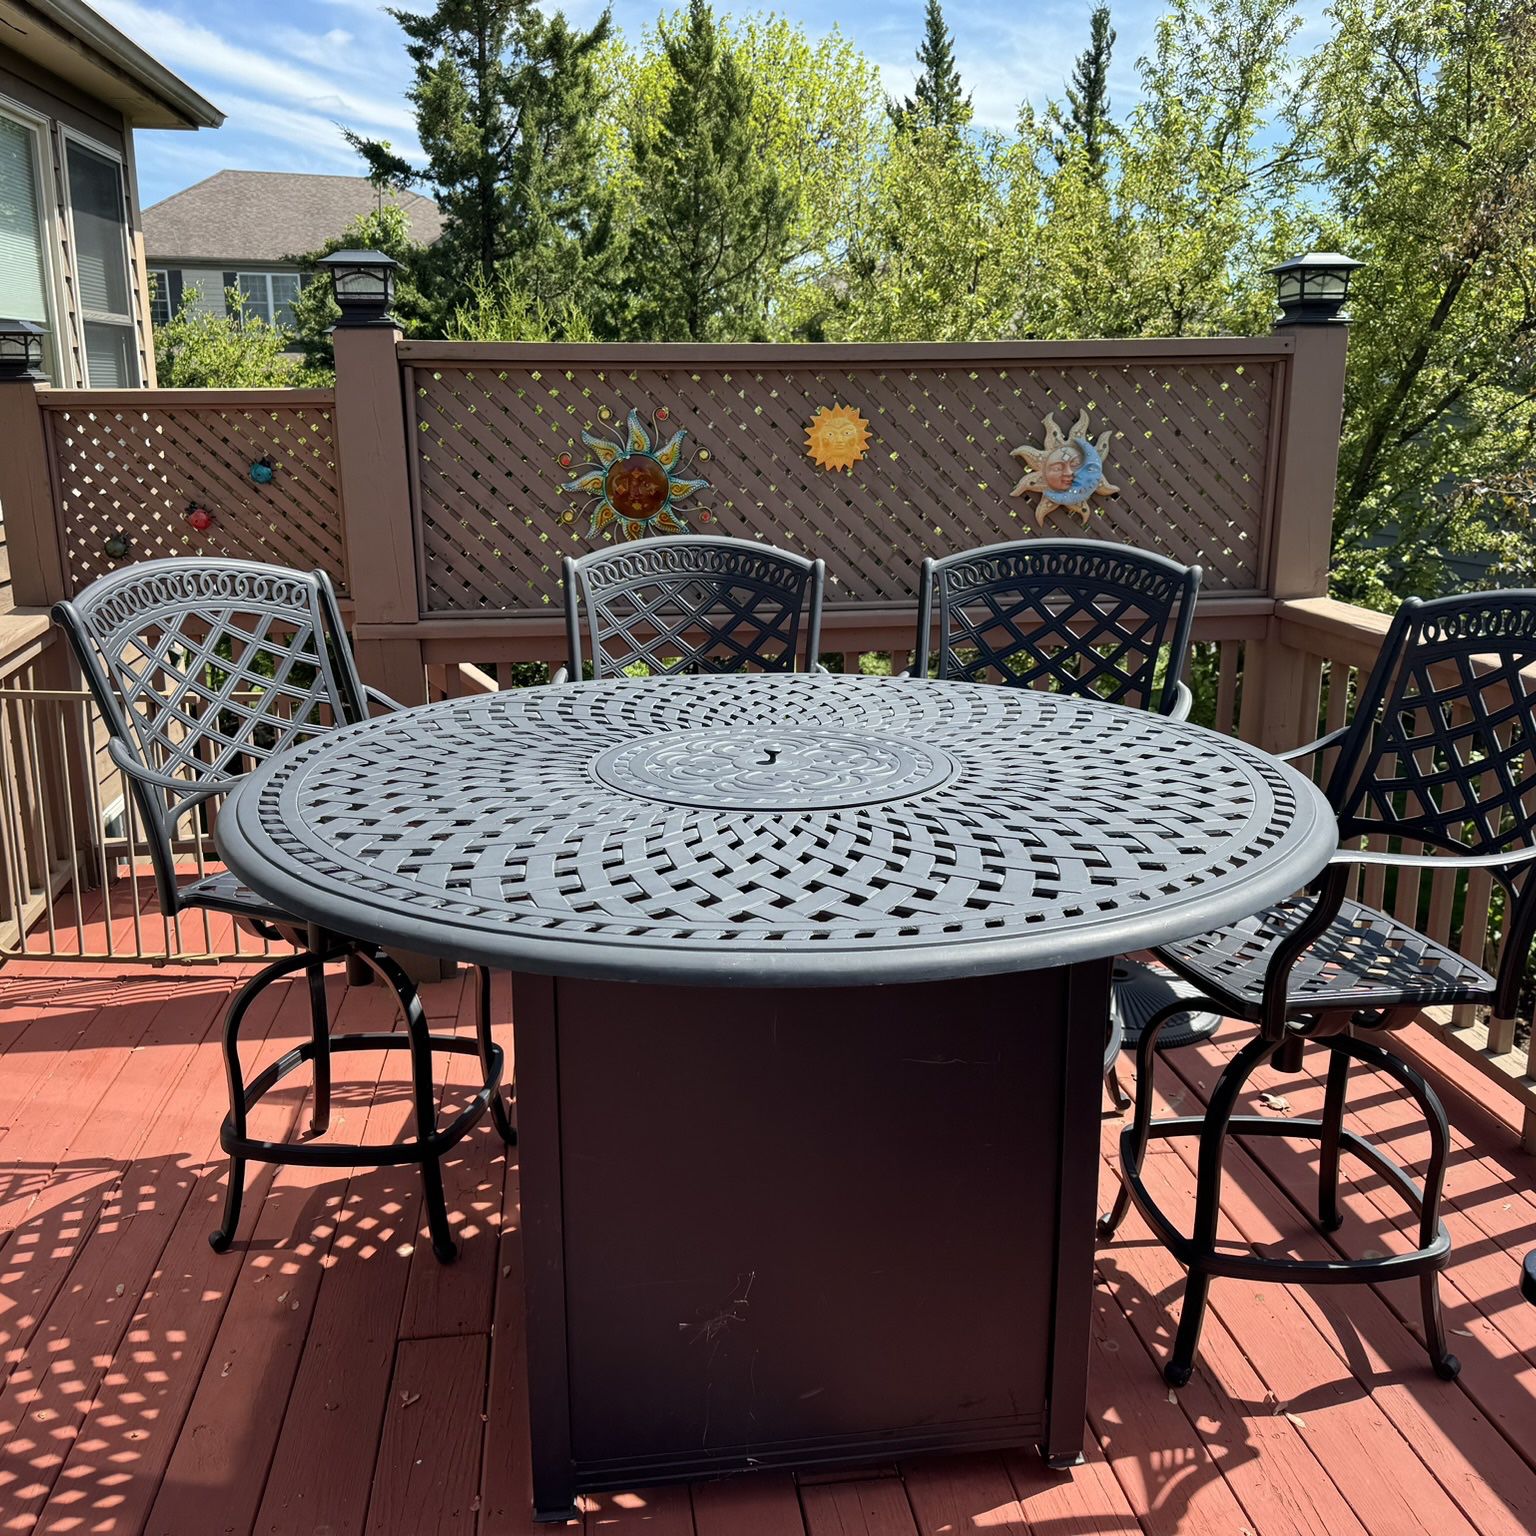 PATIO TABLE - 60” FIRE TABLE WITH 4 CHAIRS - $1000 OBO